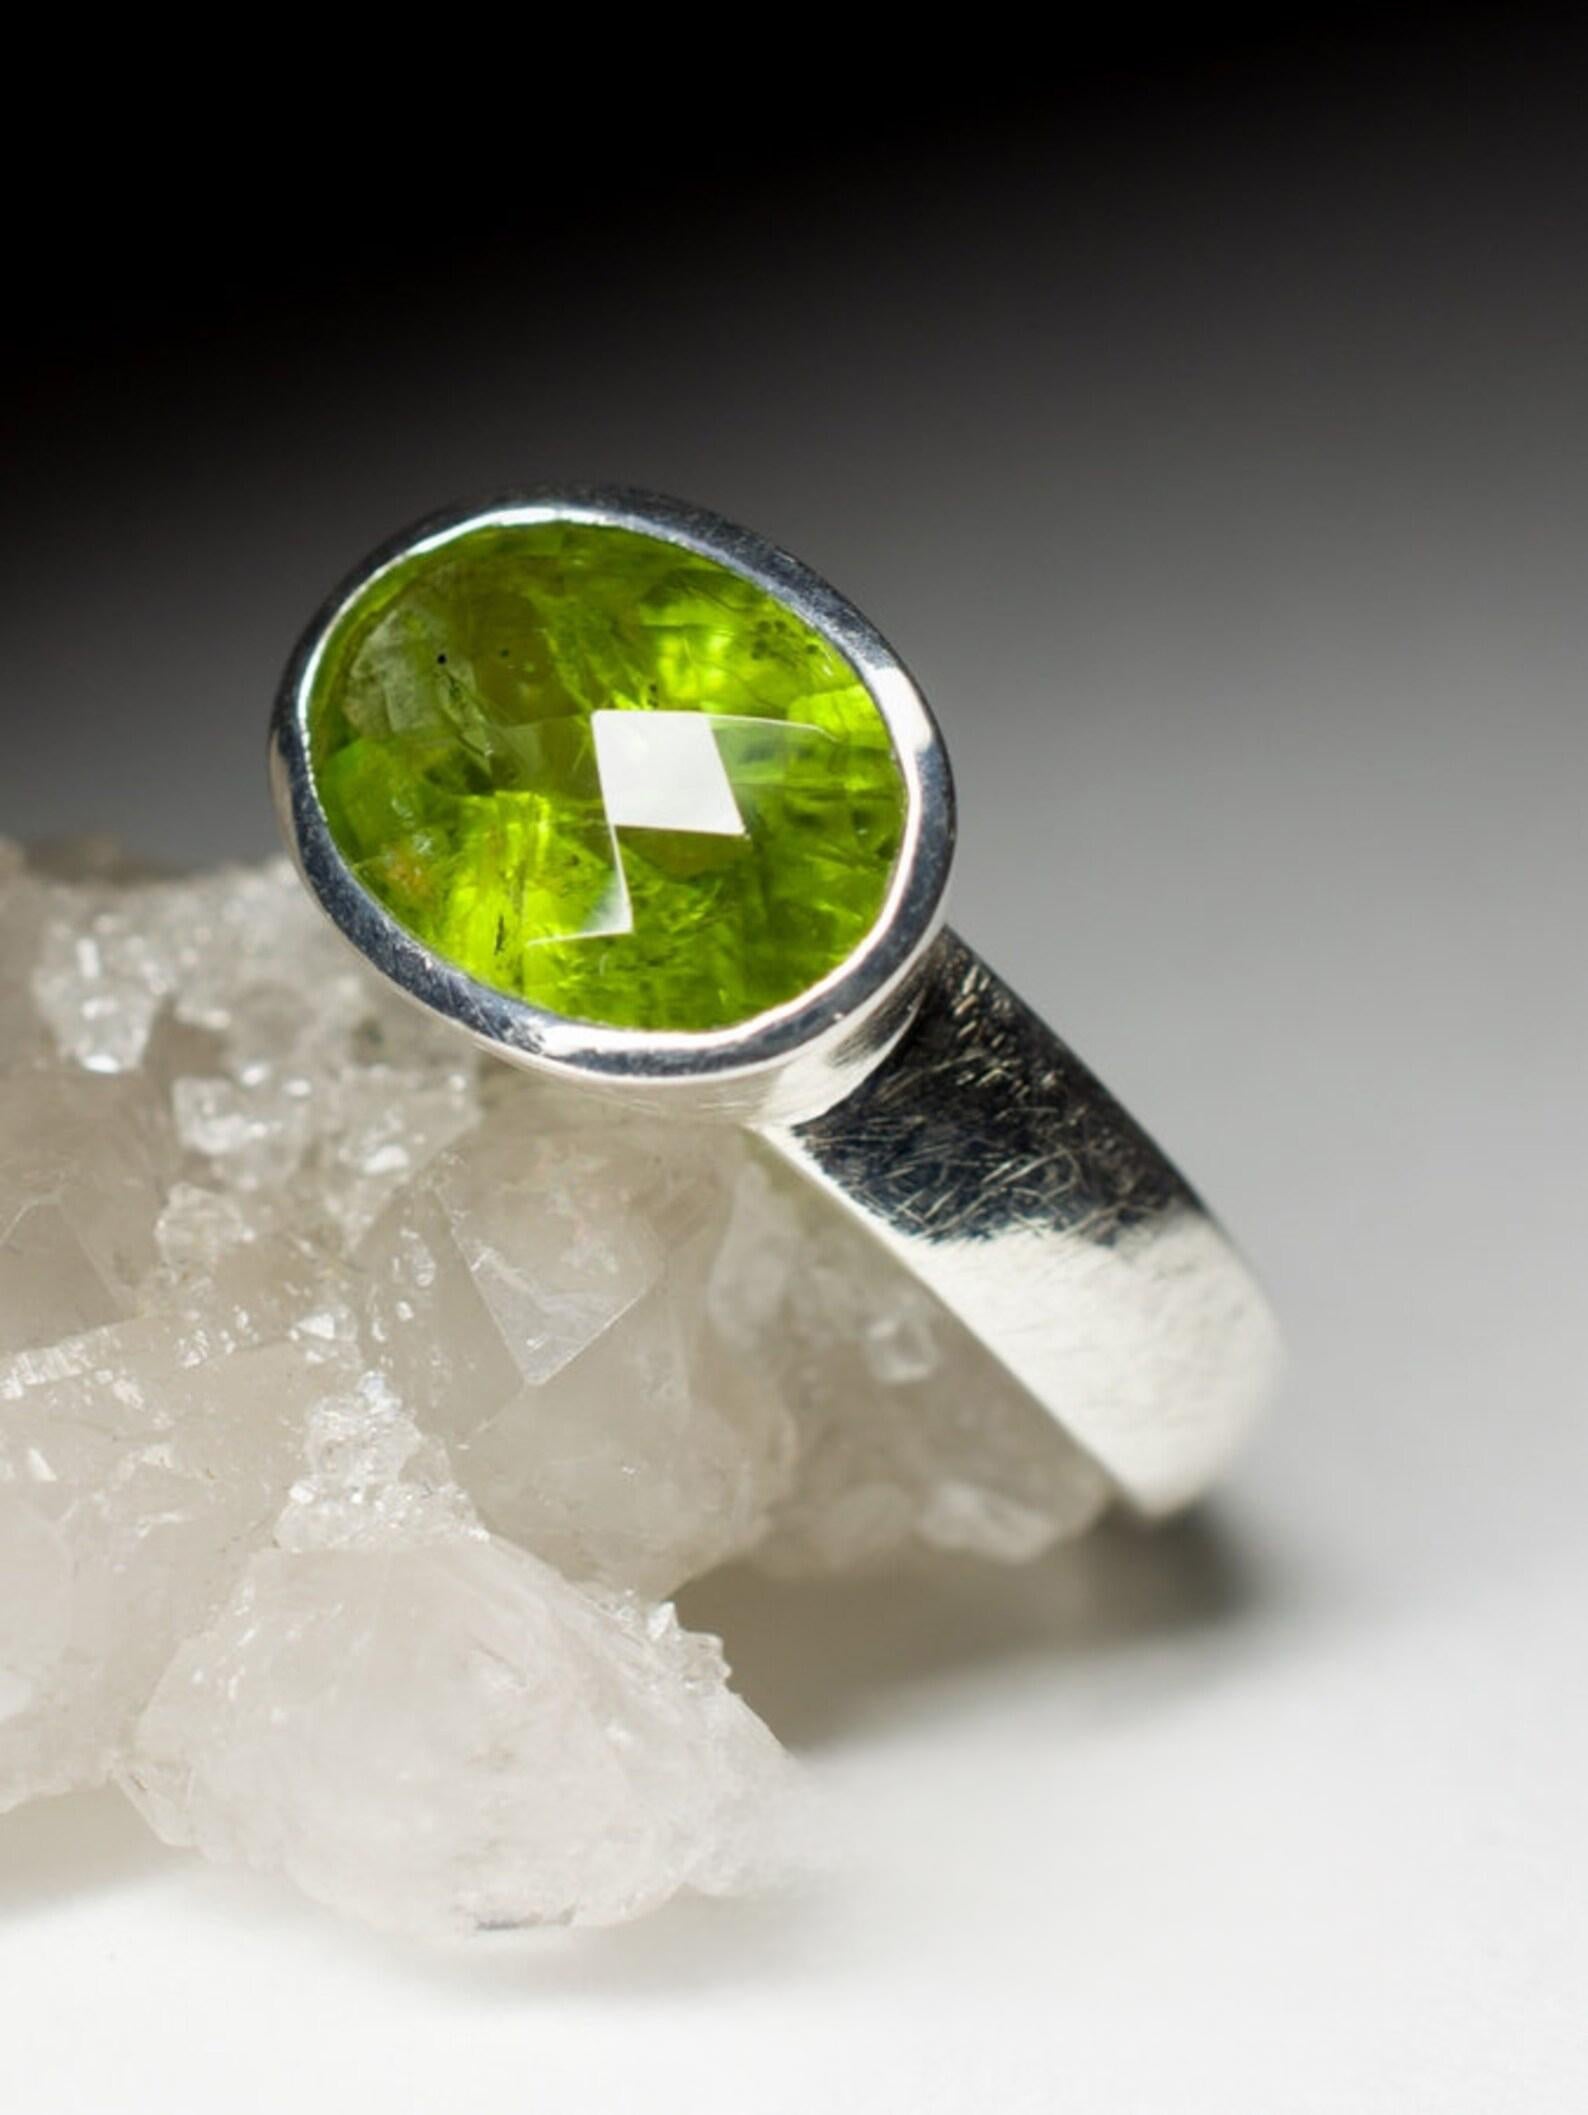 Silver ring with natural Peridot (olivine) in classic oval cut 
gemstone origin - China
stone weight - 3 ct
ring weight - 2.94 grams
ring size - 8.5
gem size is 0.12 x 0.16 x 0.24 in / 3 х 4 х 6 mm